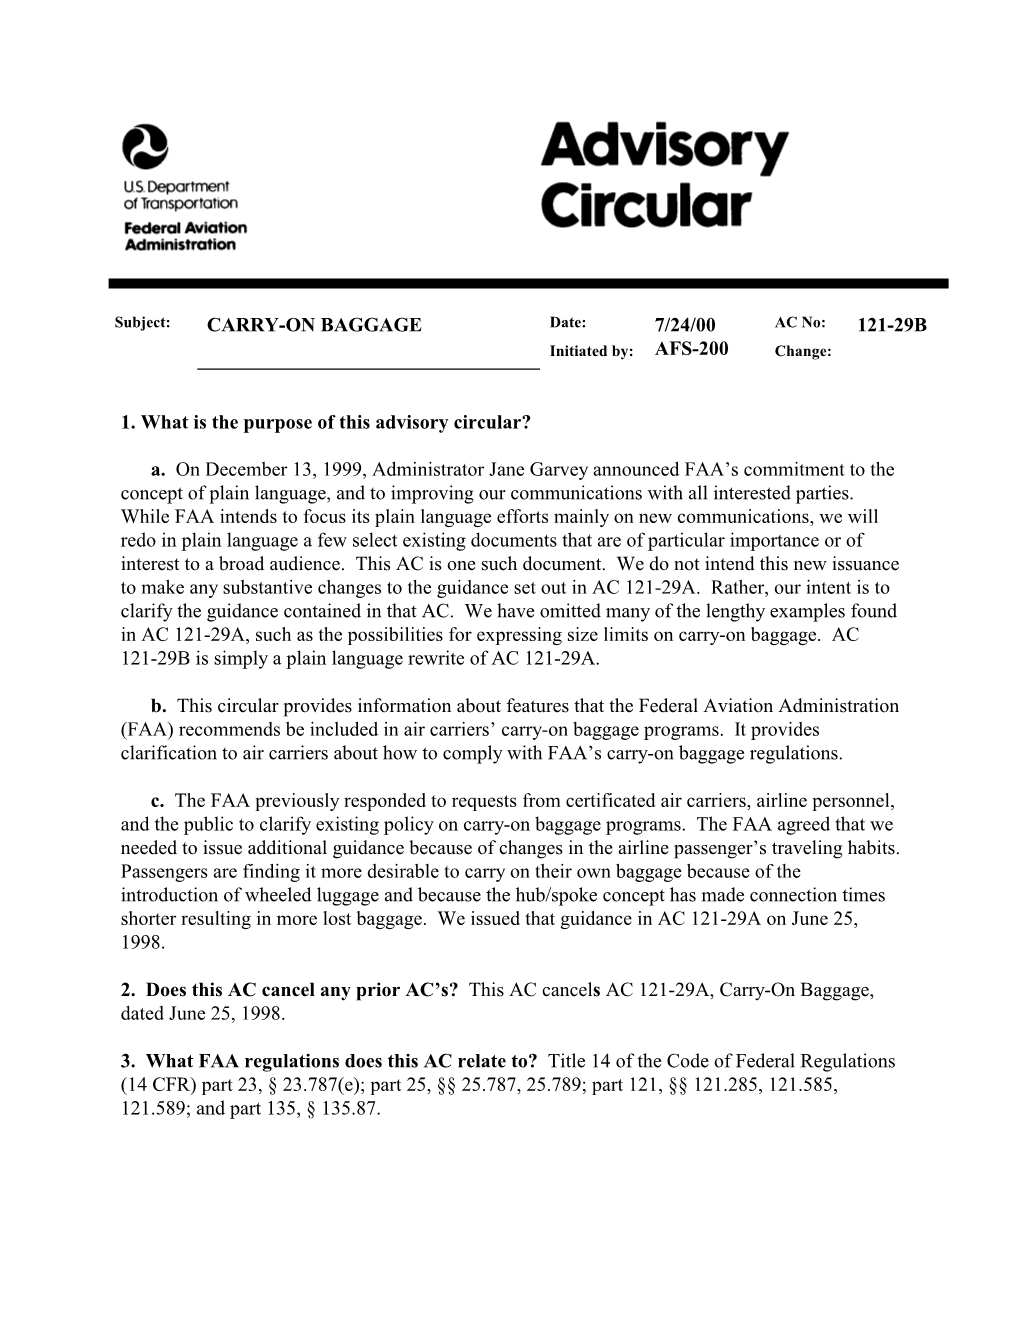 CARRY-ON BAGGAGE Date: 7/24/00 AC No: 121-29B Initiated By: AFS-200 Change